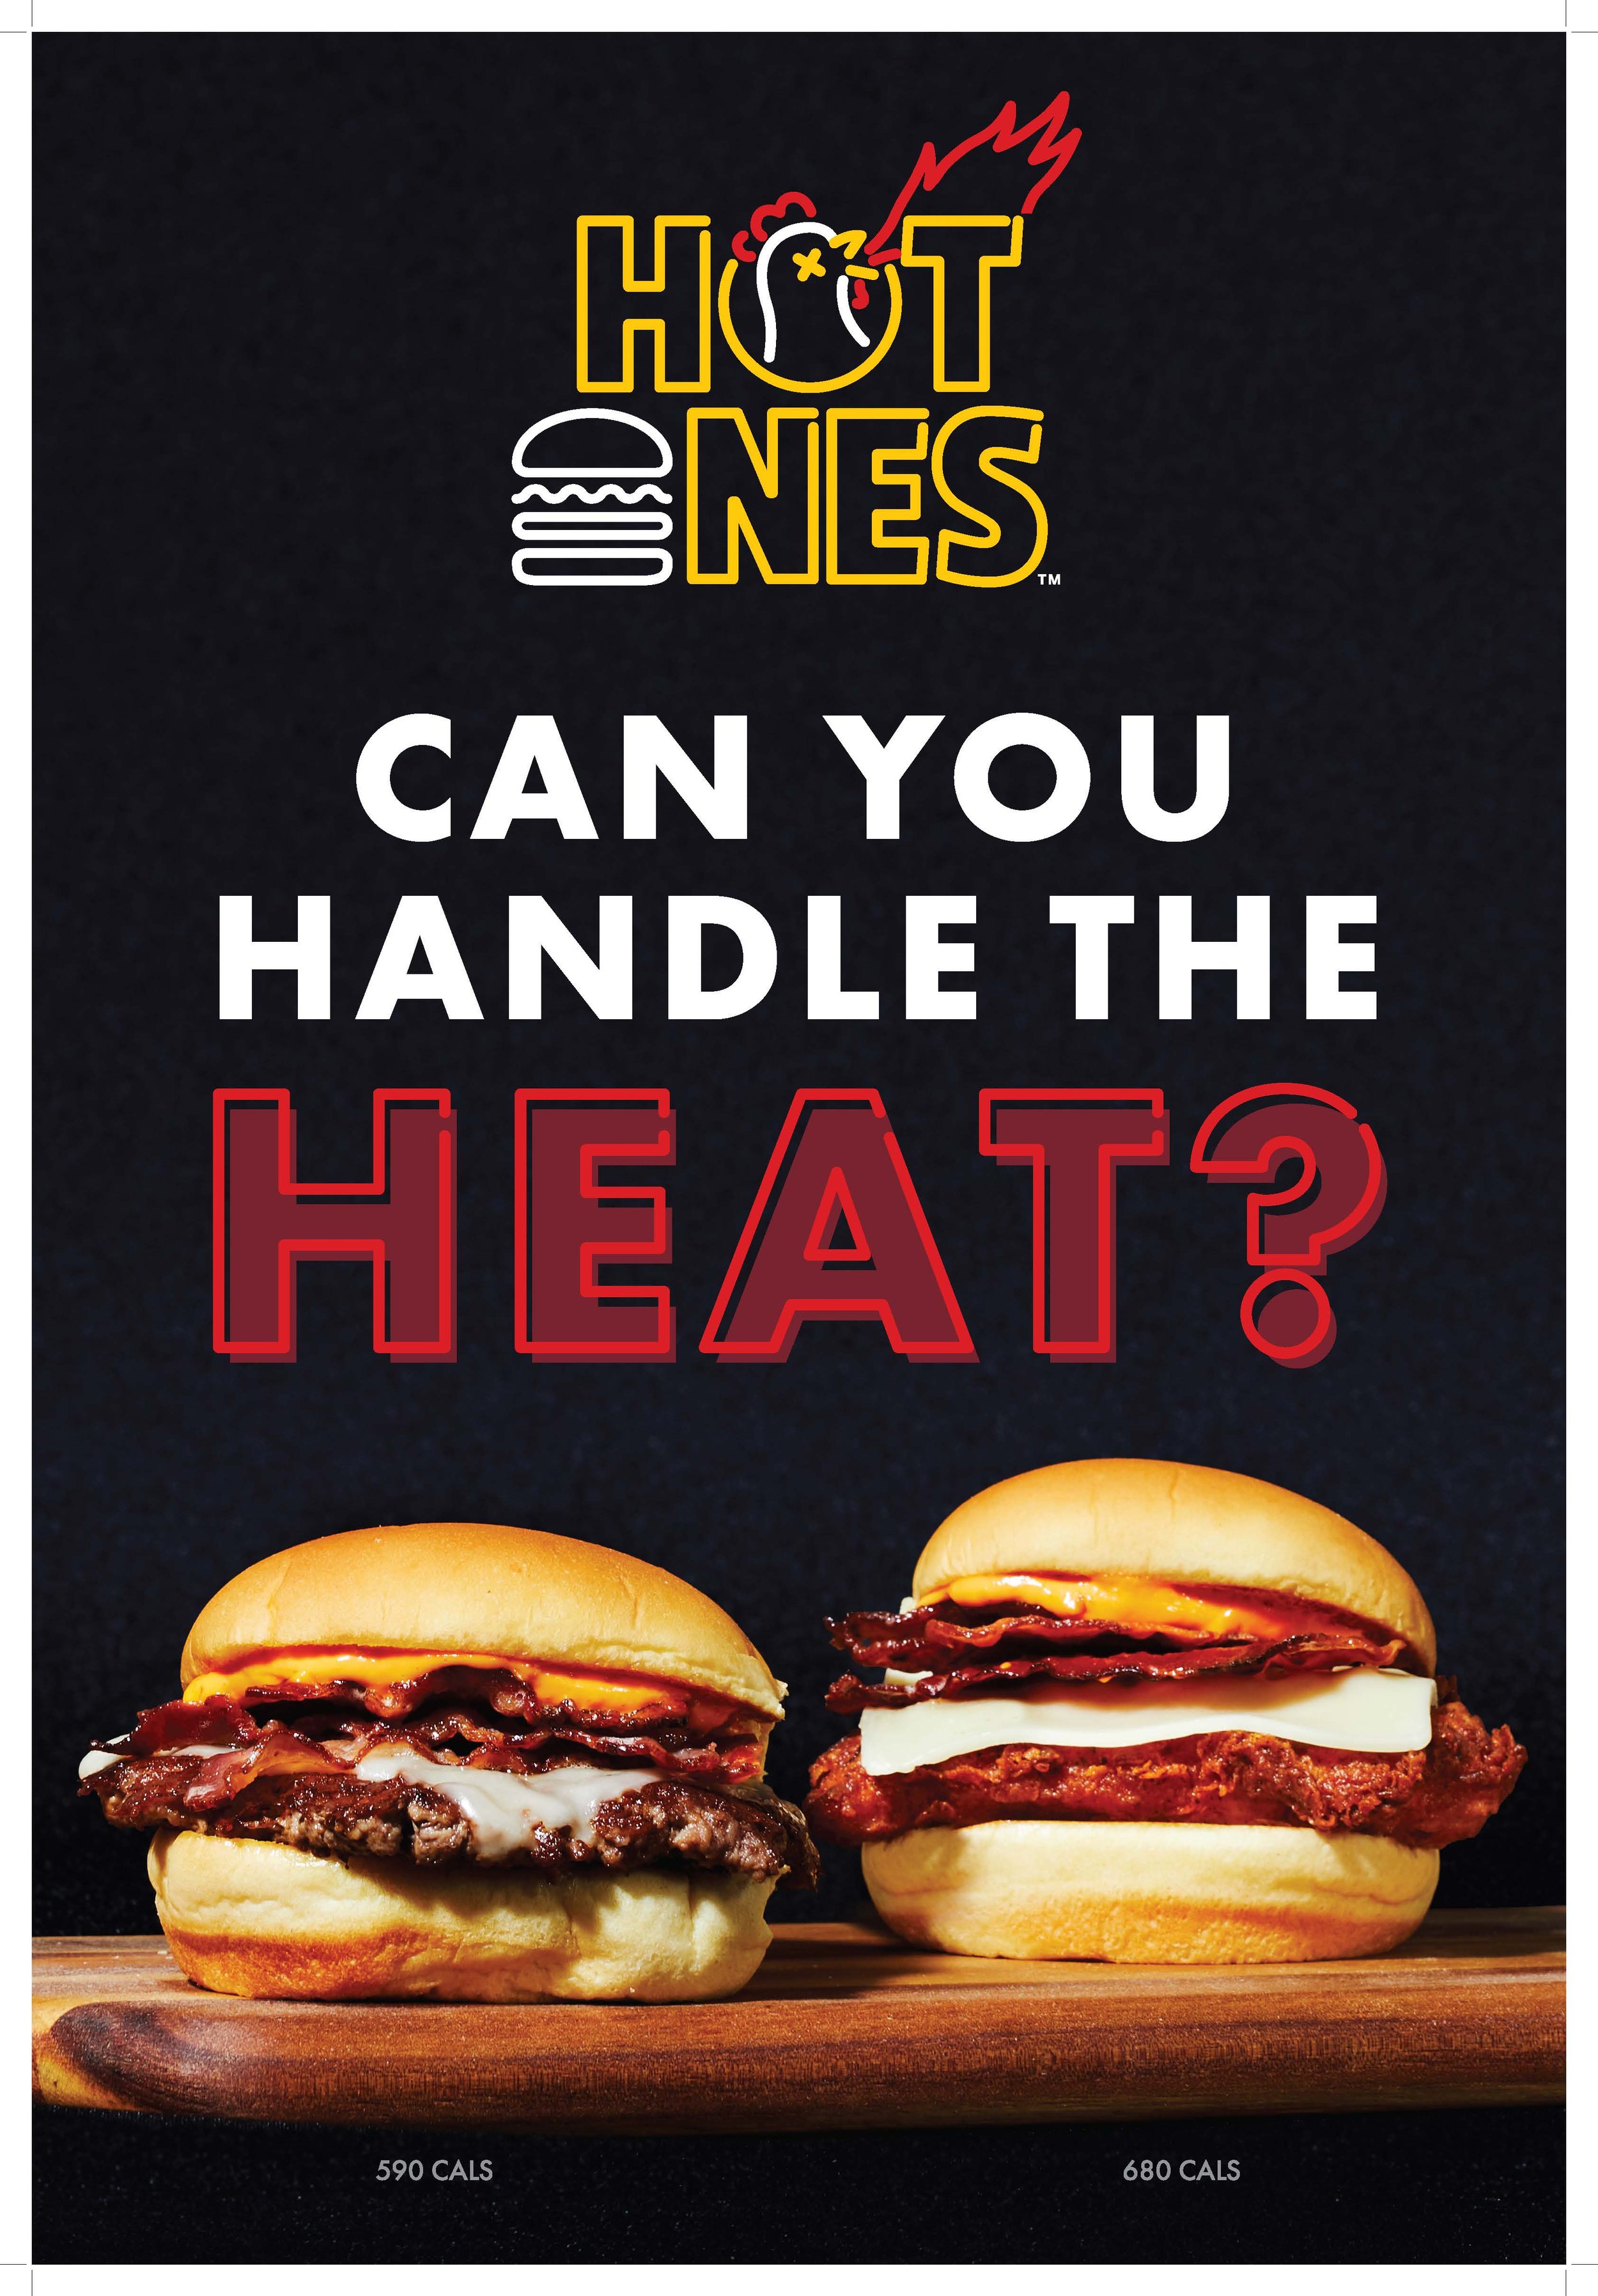 Shake Shack x Hot Ones Collab Campaign